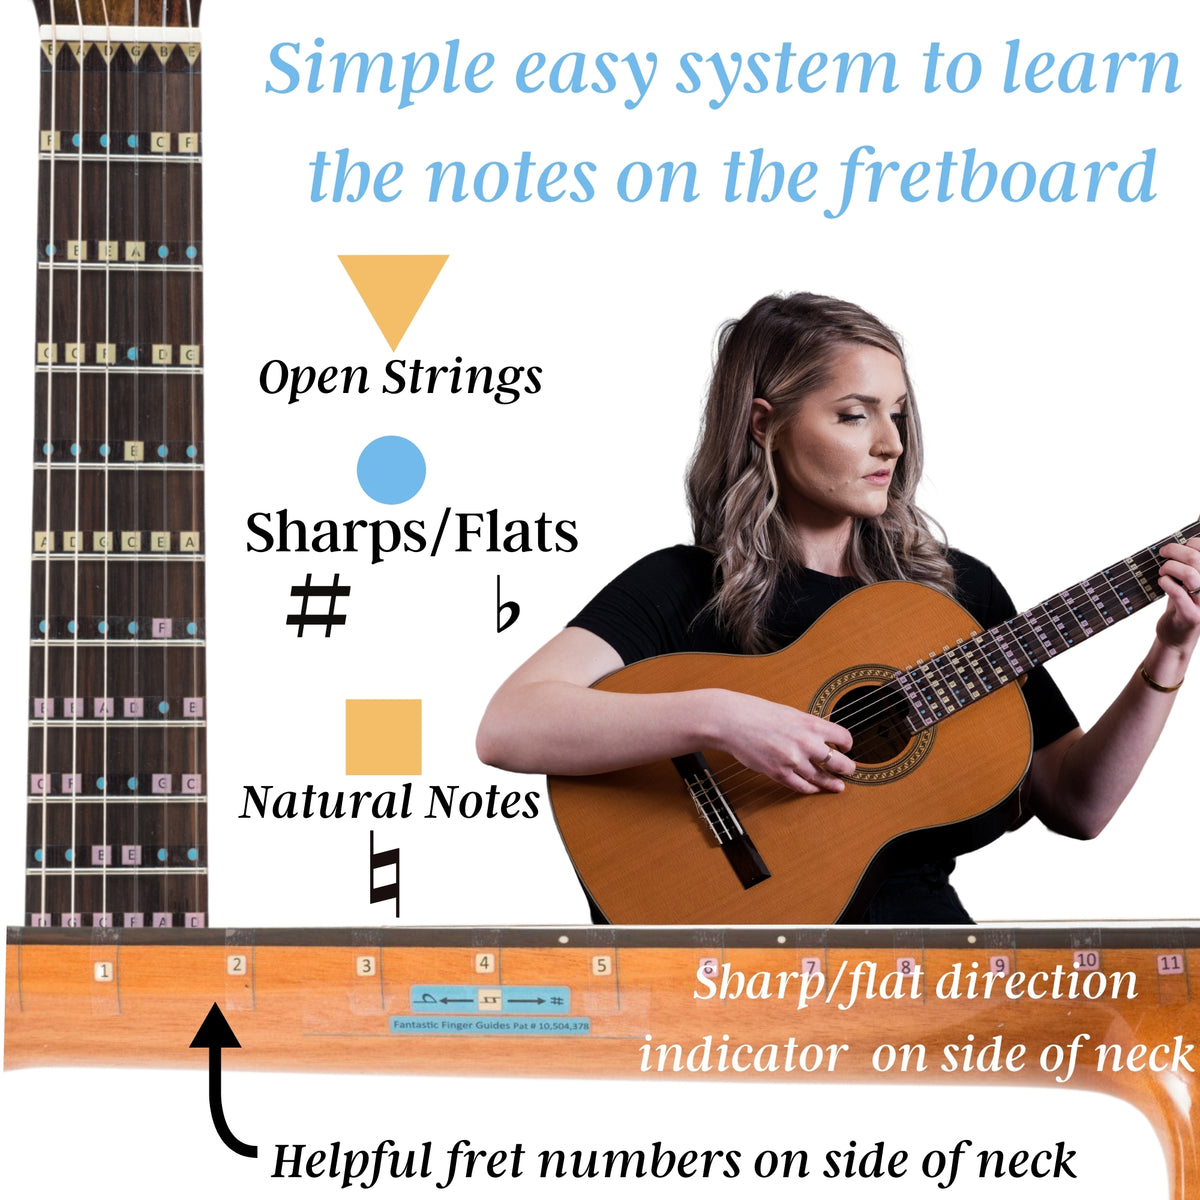 classical guitar string notes